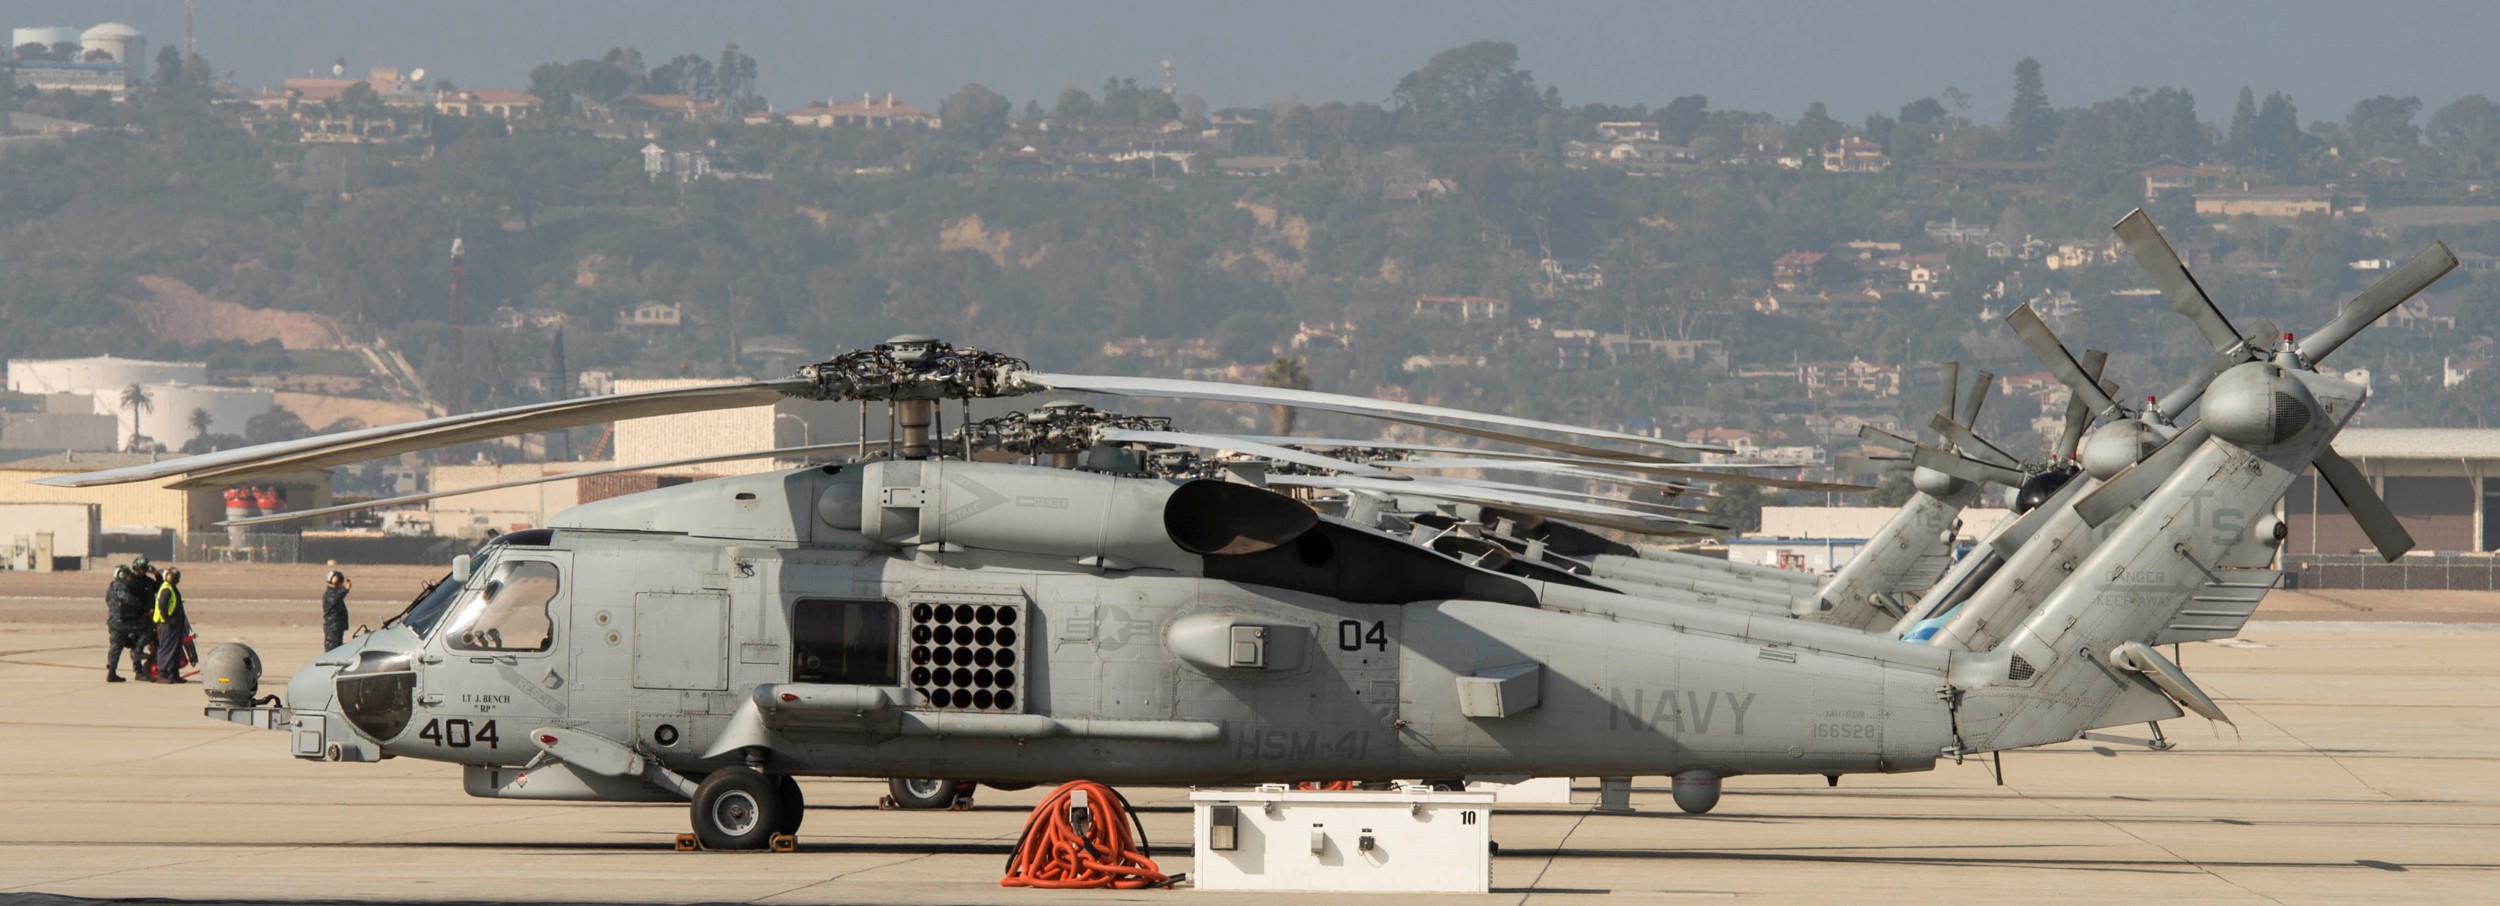 hsm-41 seahawks helicopter maritime strike squadron mh-60r fleet replacement navy 2015 03